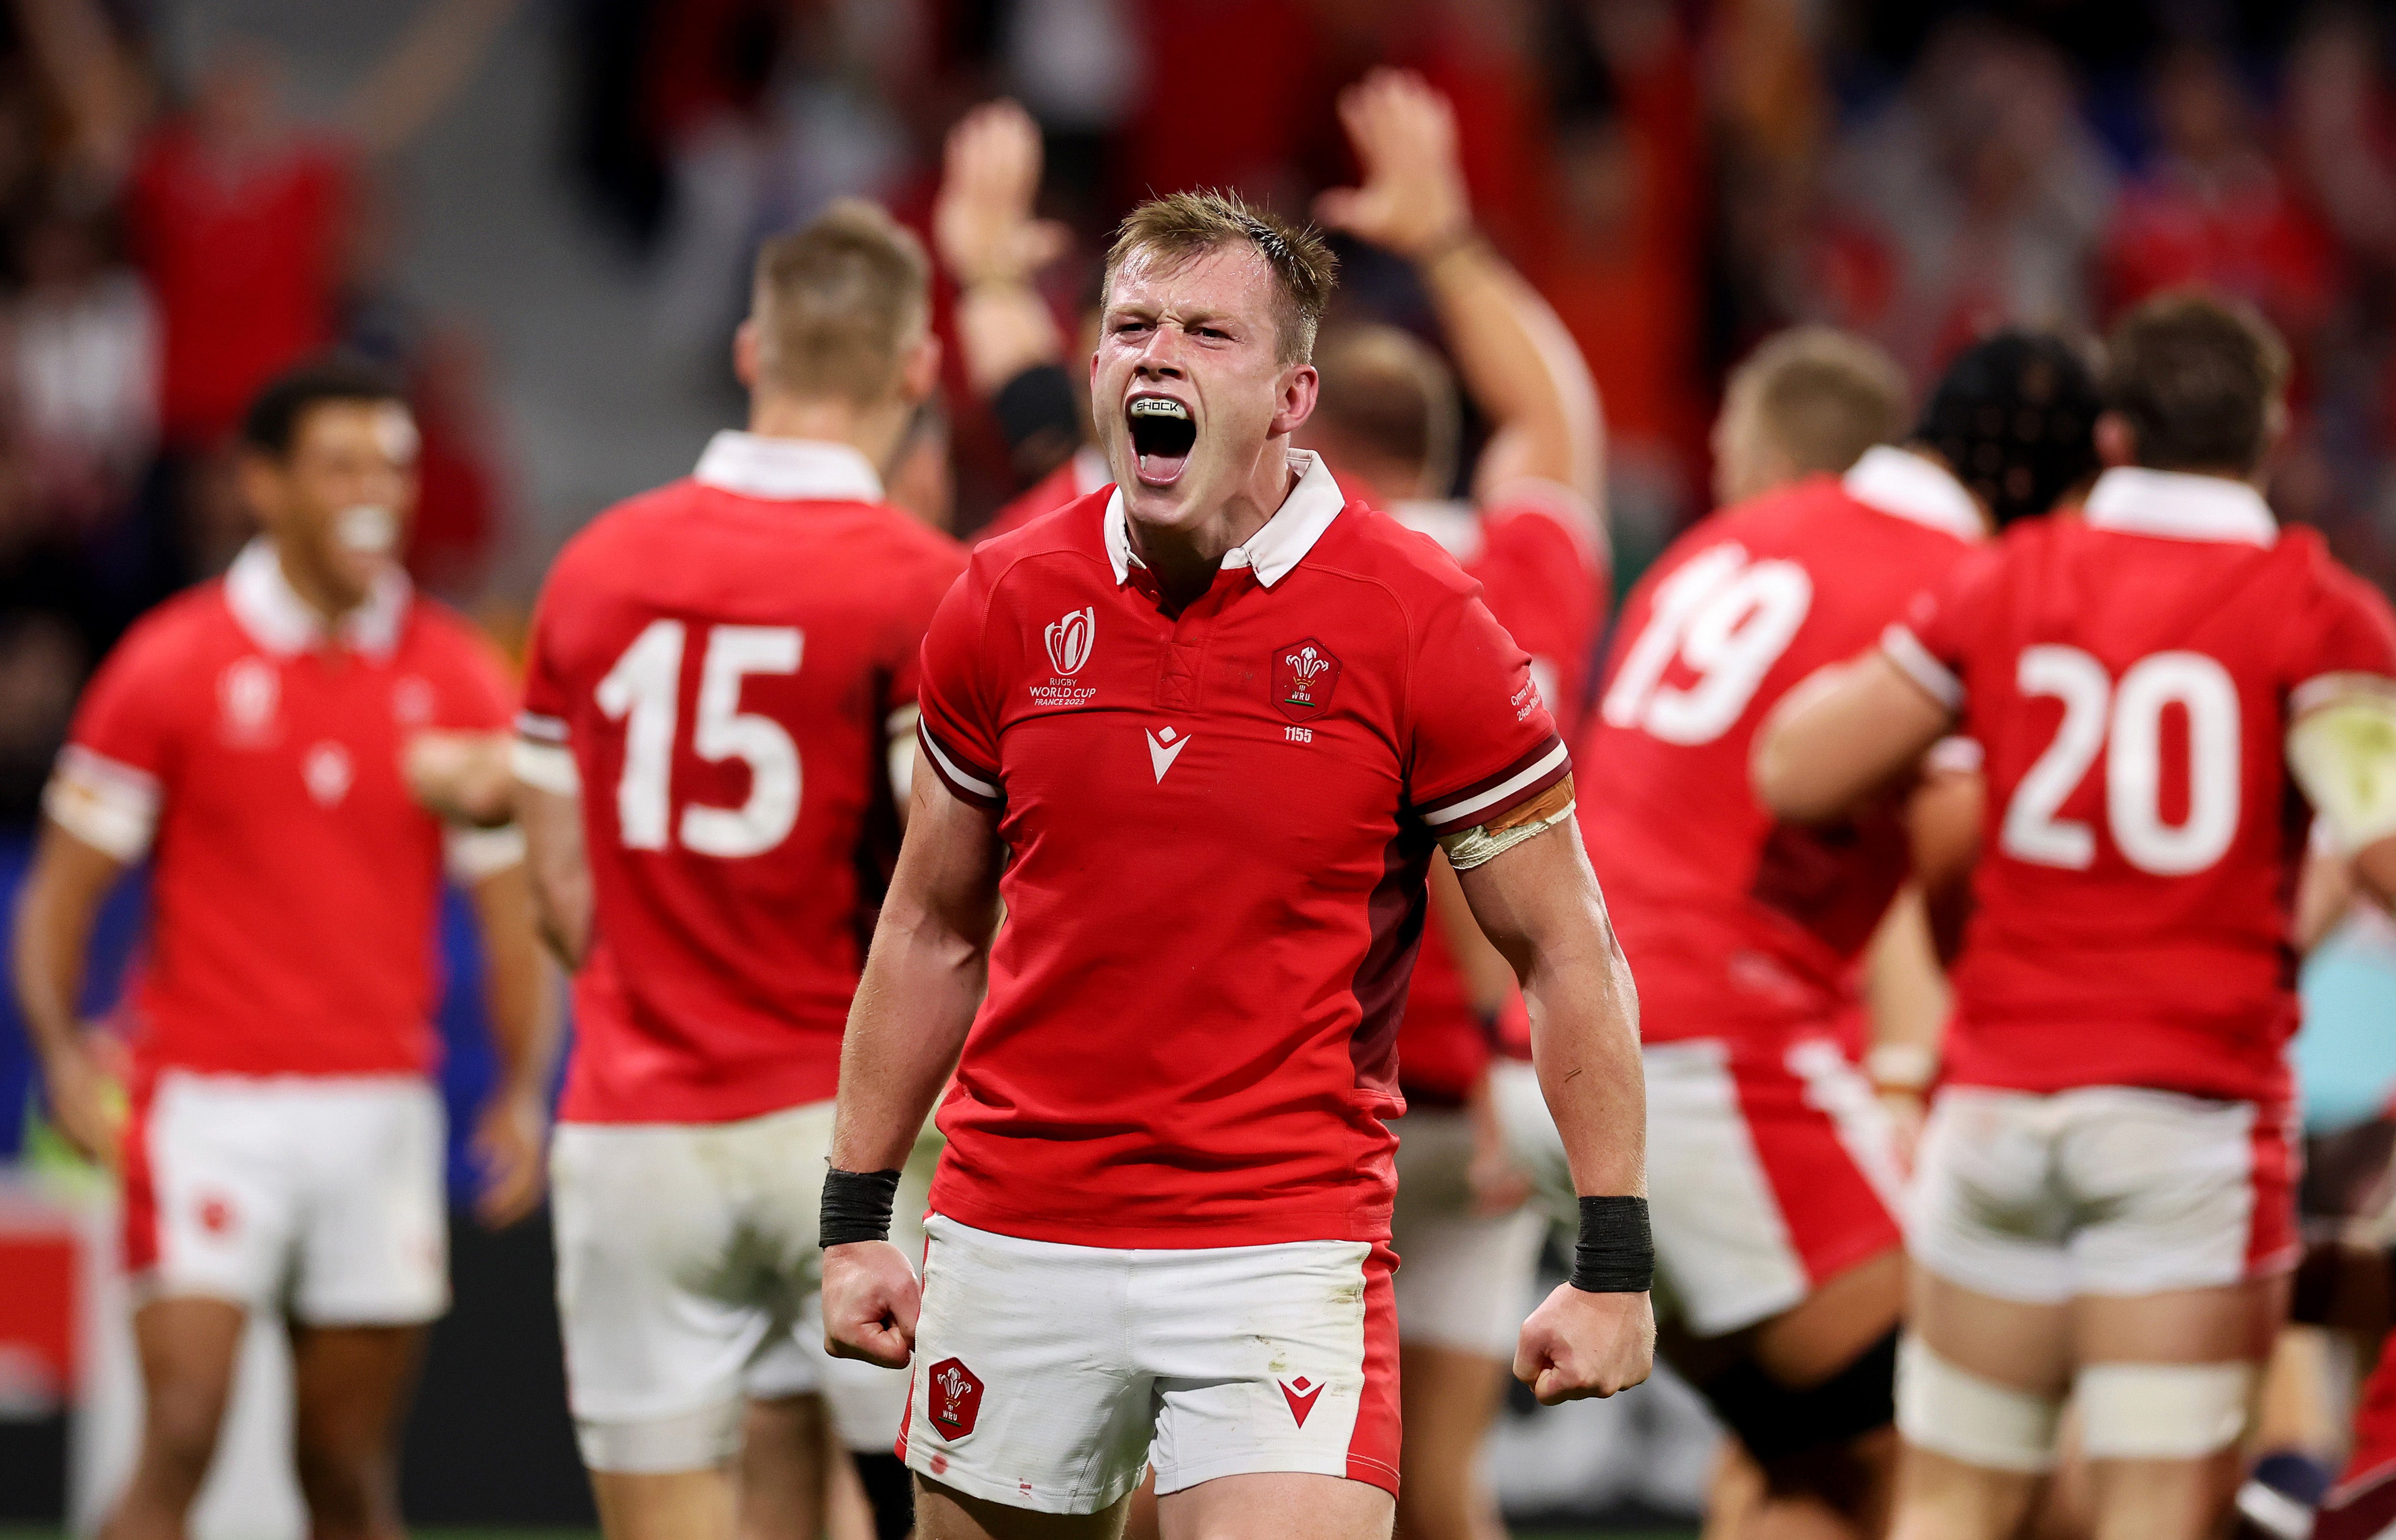 Wales impressed in the pool stages